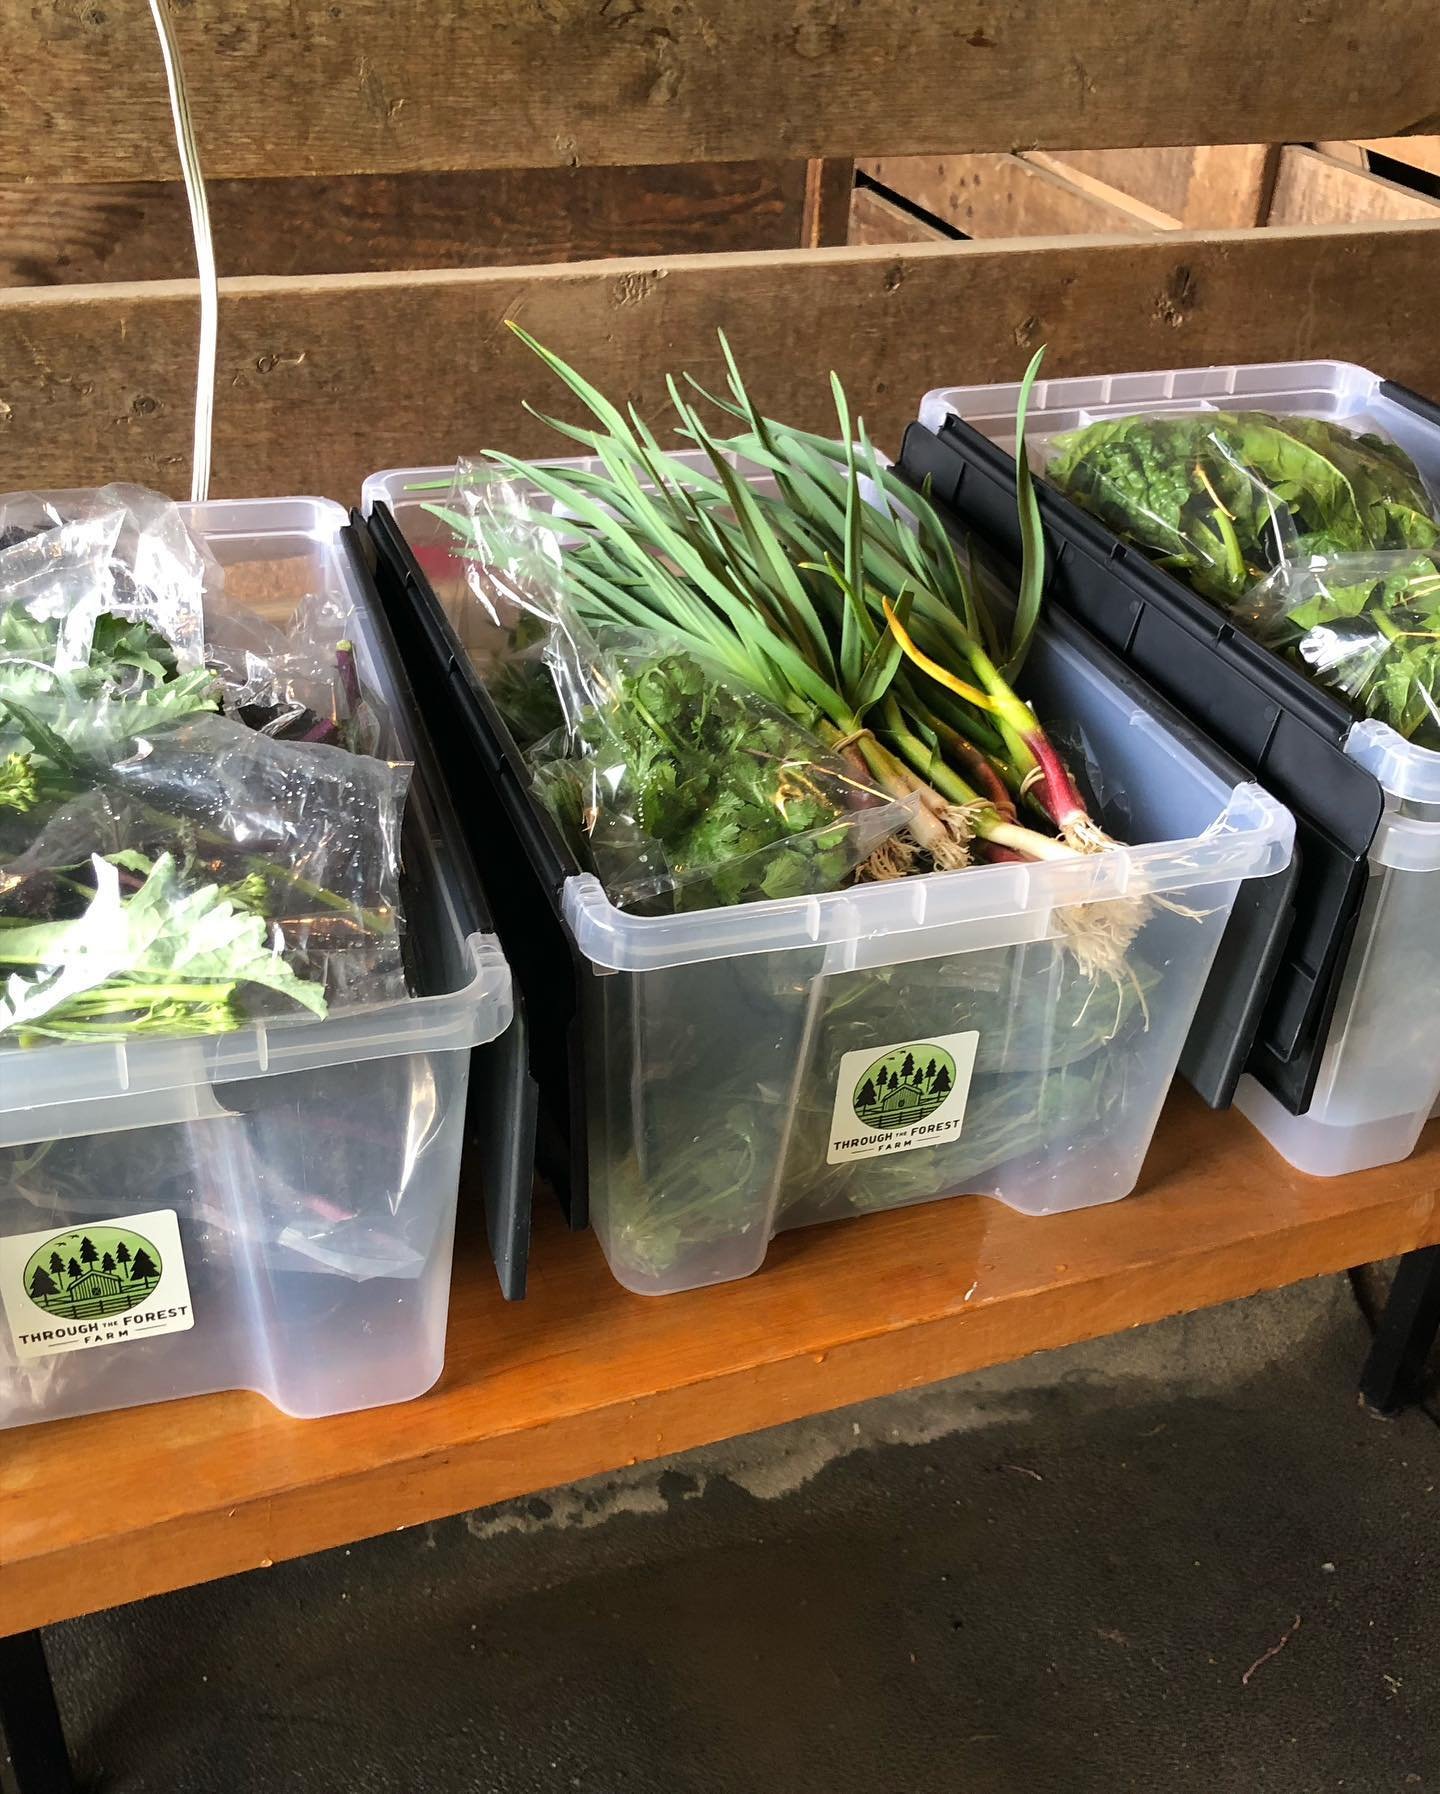 Thank you CSA members for the opportunity to provide you with this early April - healthy, flavorful, fresh - produce! This weeks harvest: Spinach, Green Garlic, Red Kale, Cilantro, Pea Shoots #eatinginseason #communitysupportedagriculture #clarksvill